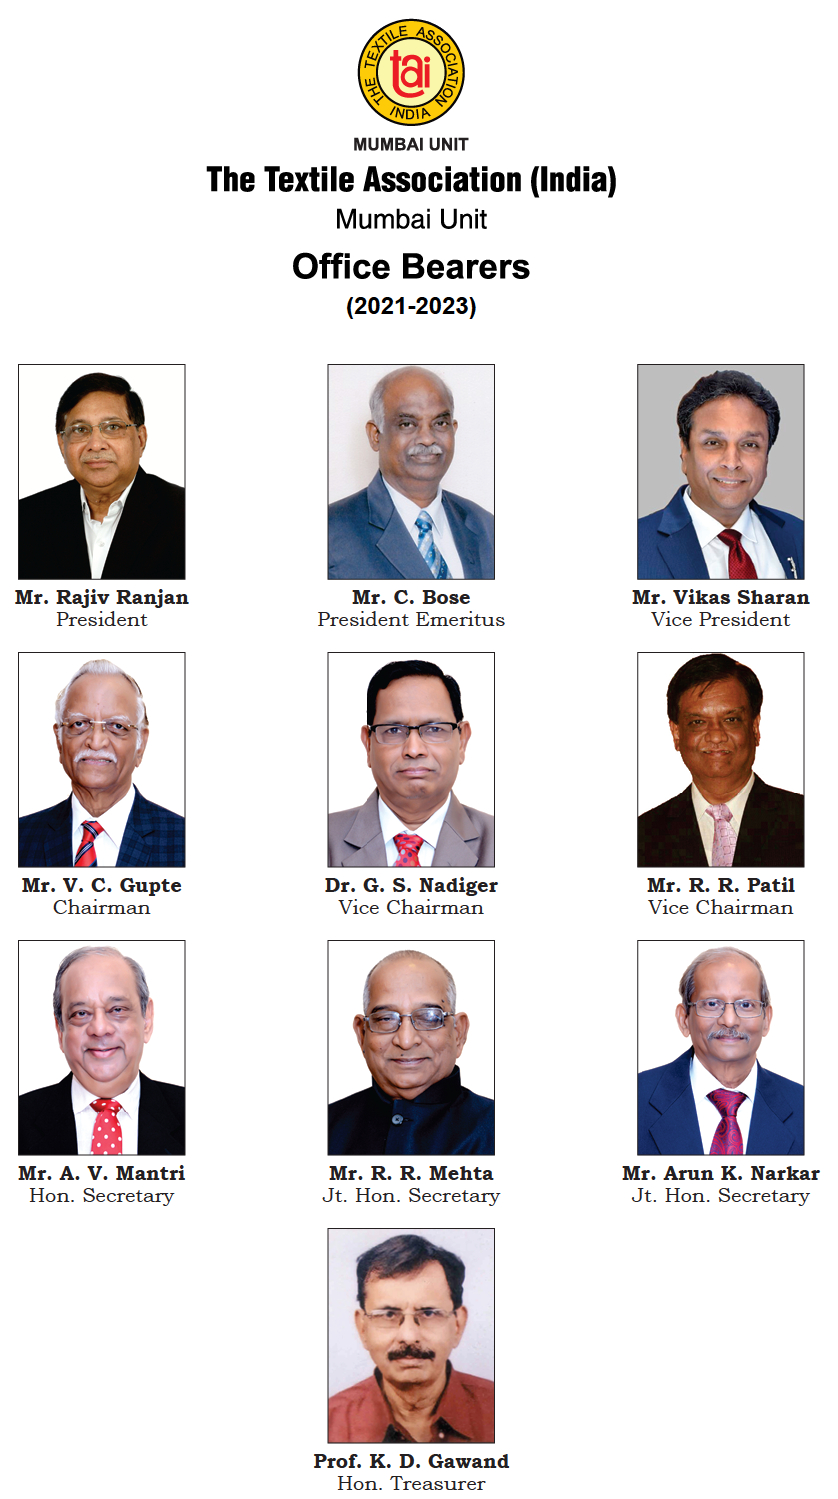 New Office Bearers of The Textile Association Of India (Mumbai Unit) for  the term 2021-2023 – New Cloth Market